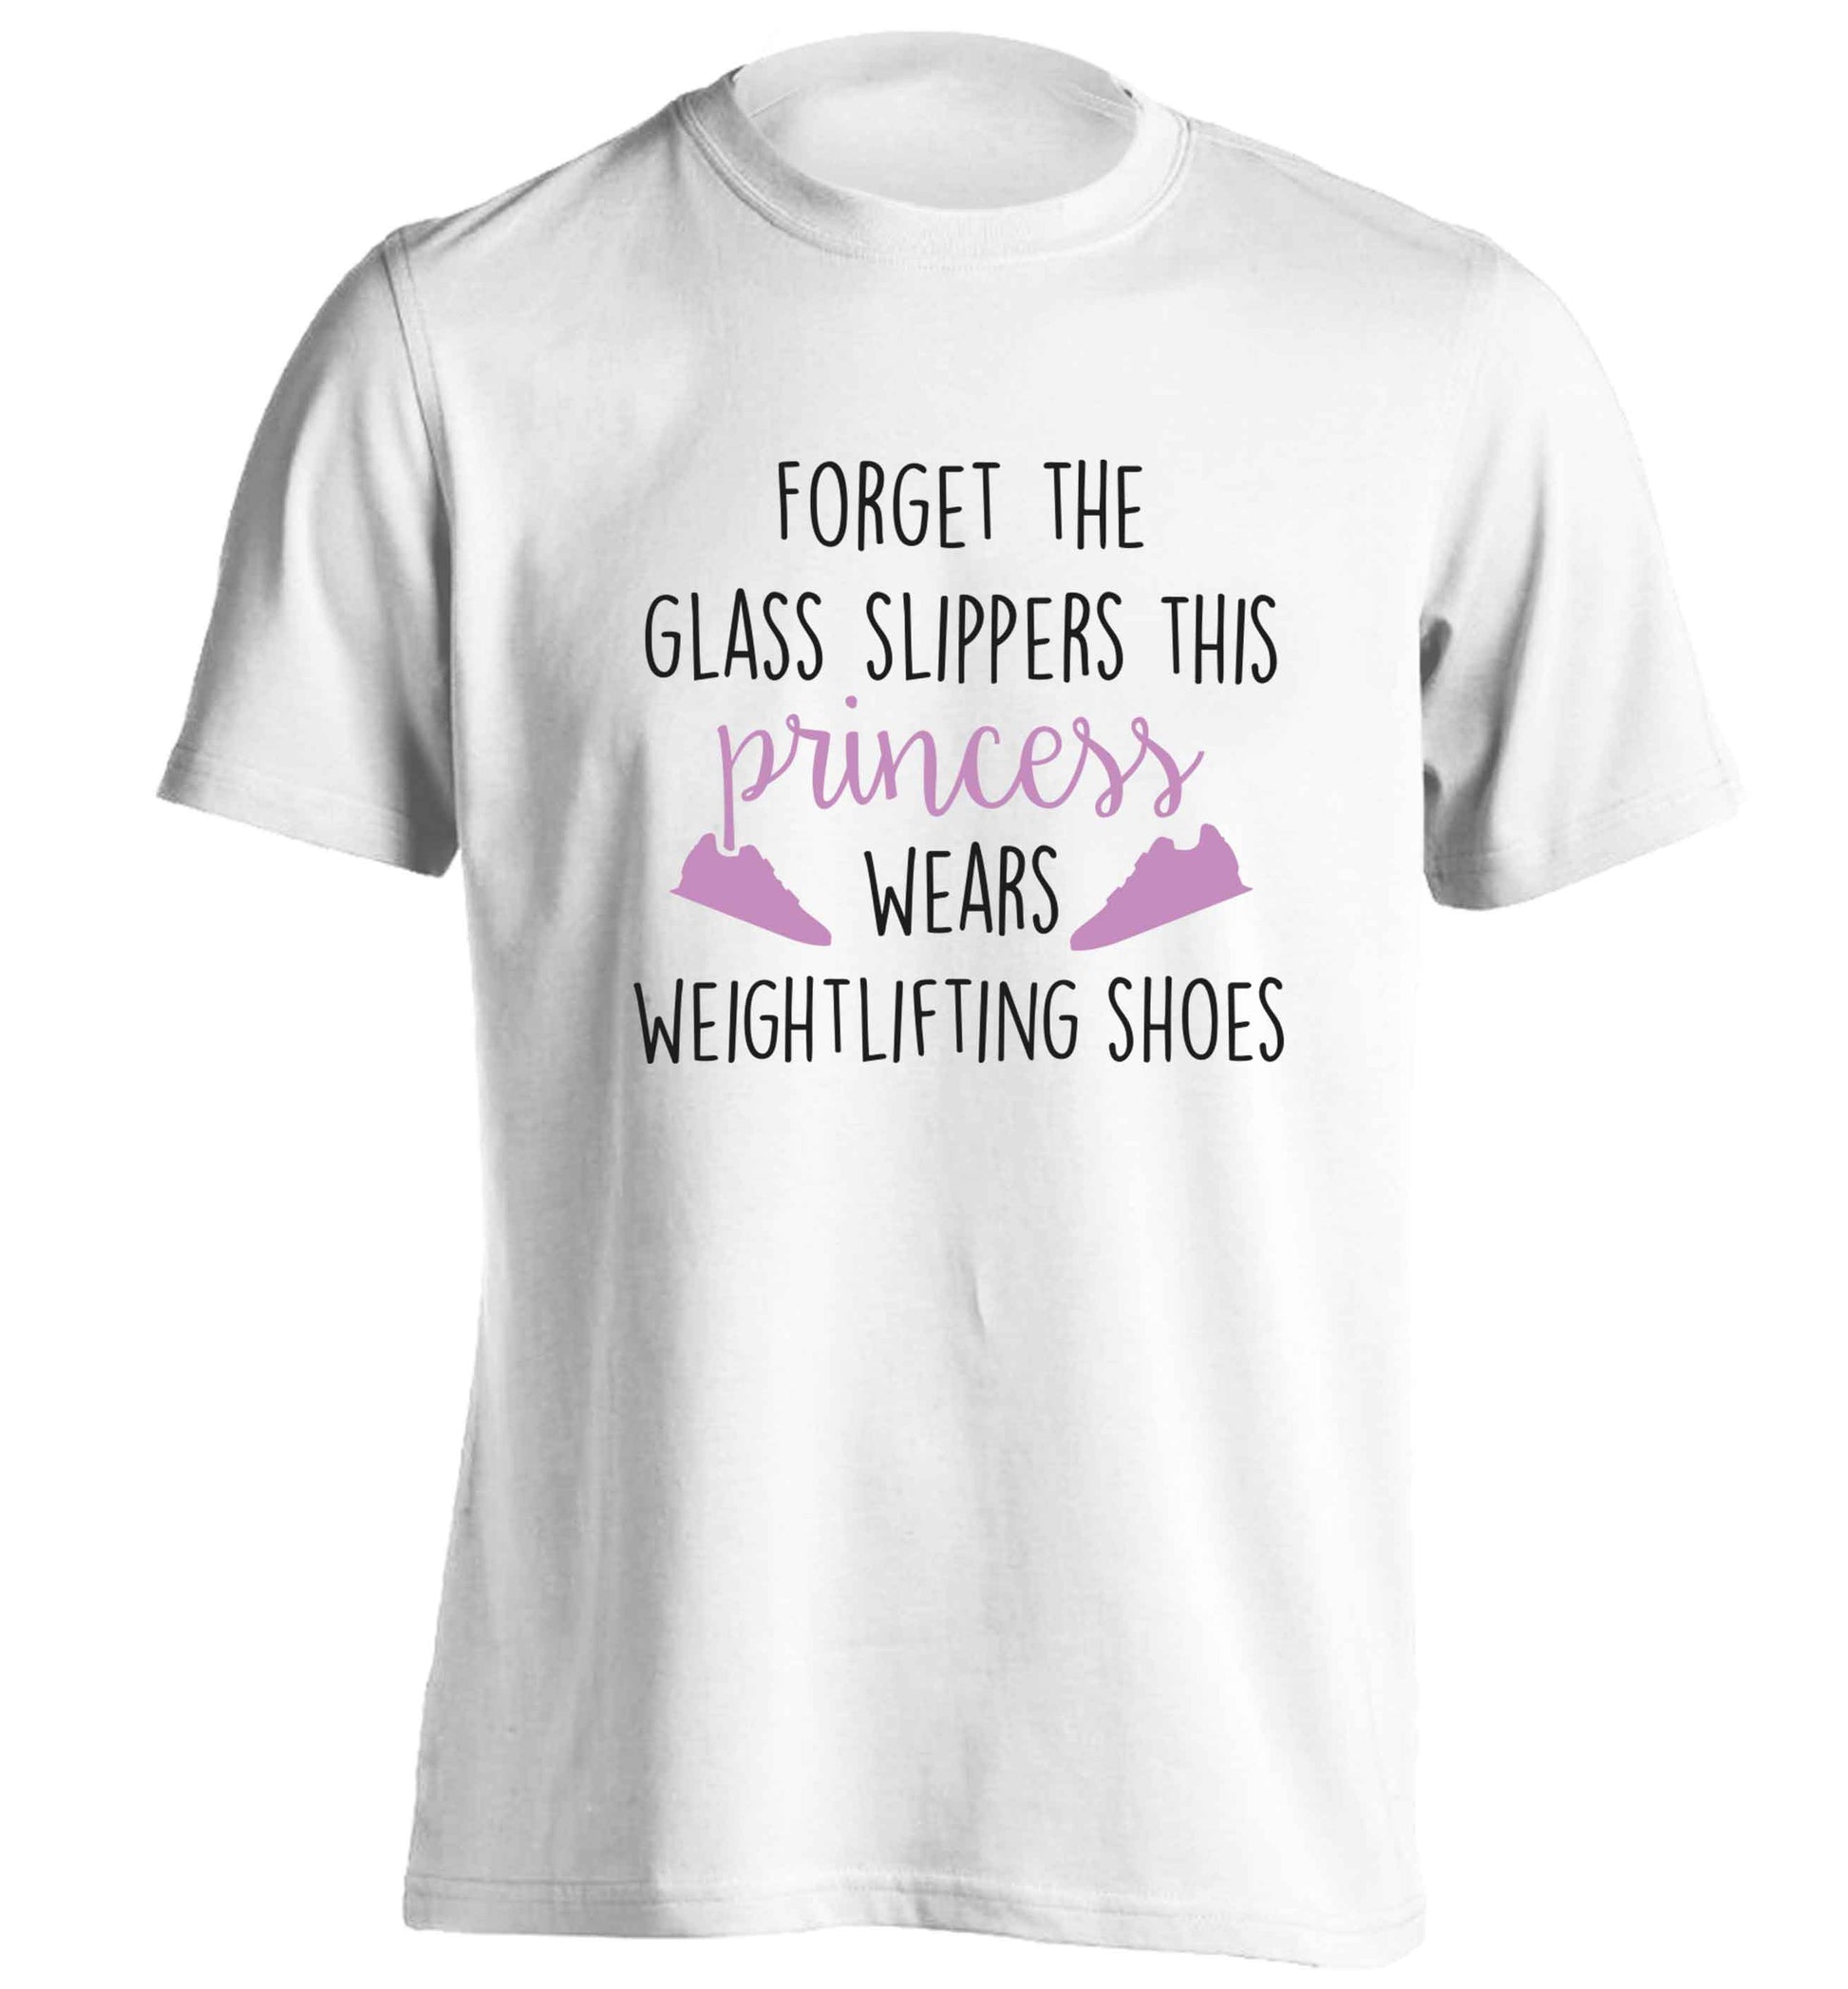 Forget the glass slippers this princess wears weightlifting shoes adults unisex white Tshirt 2XL